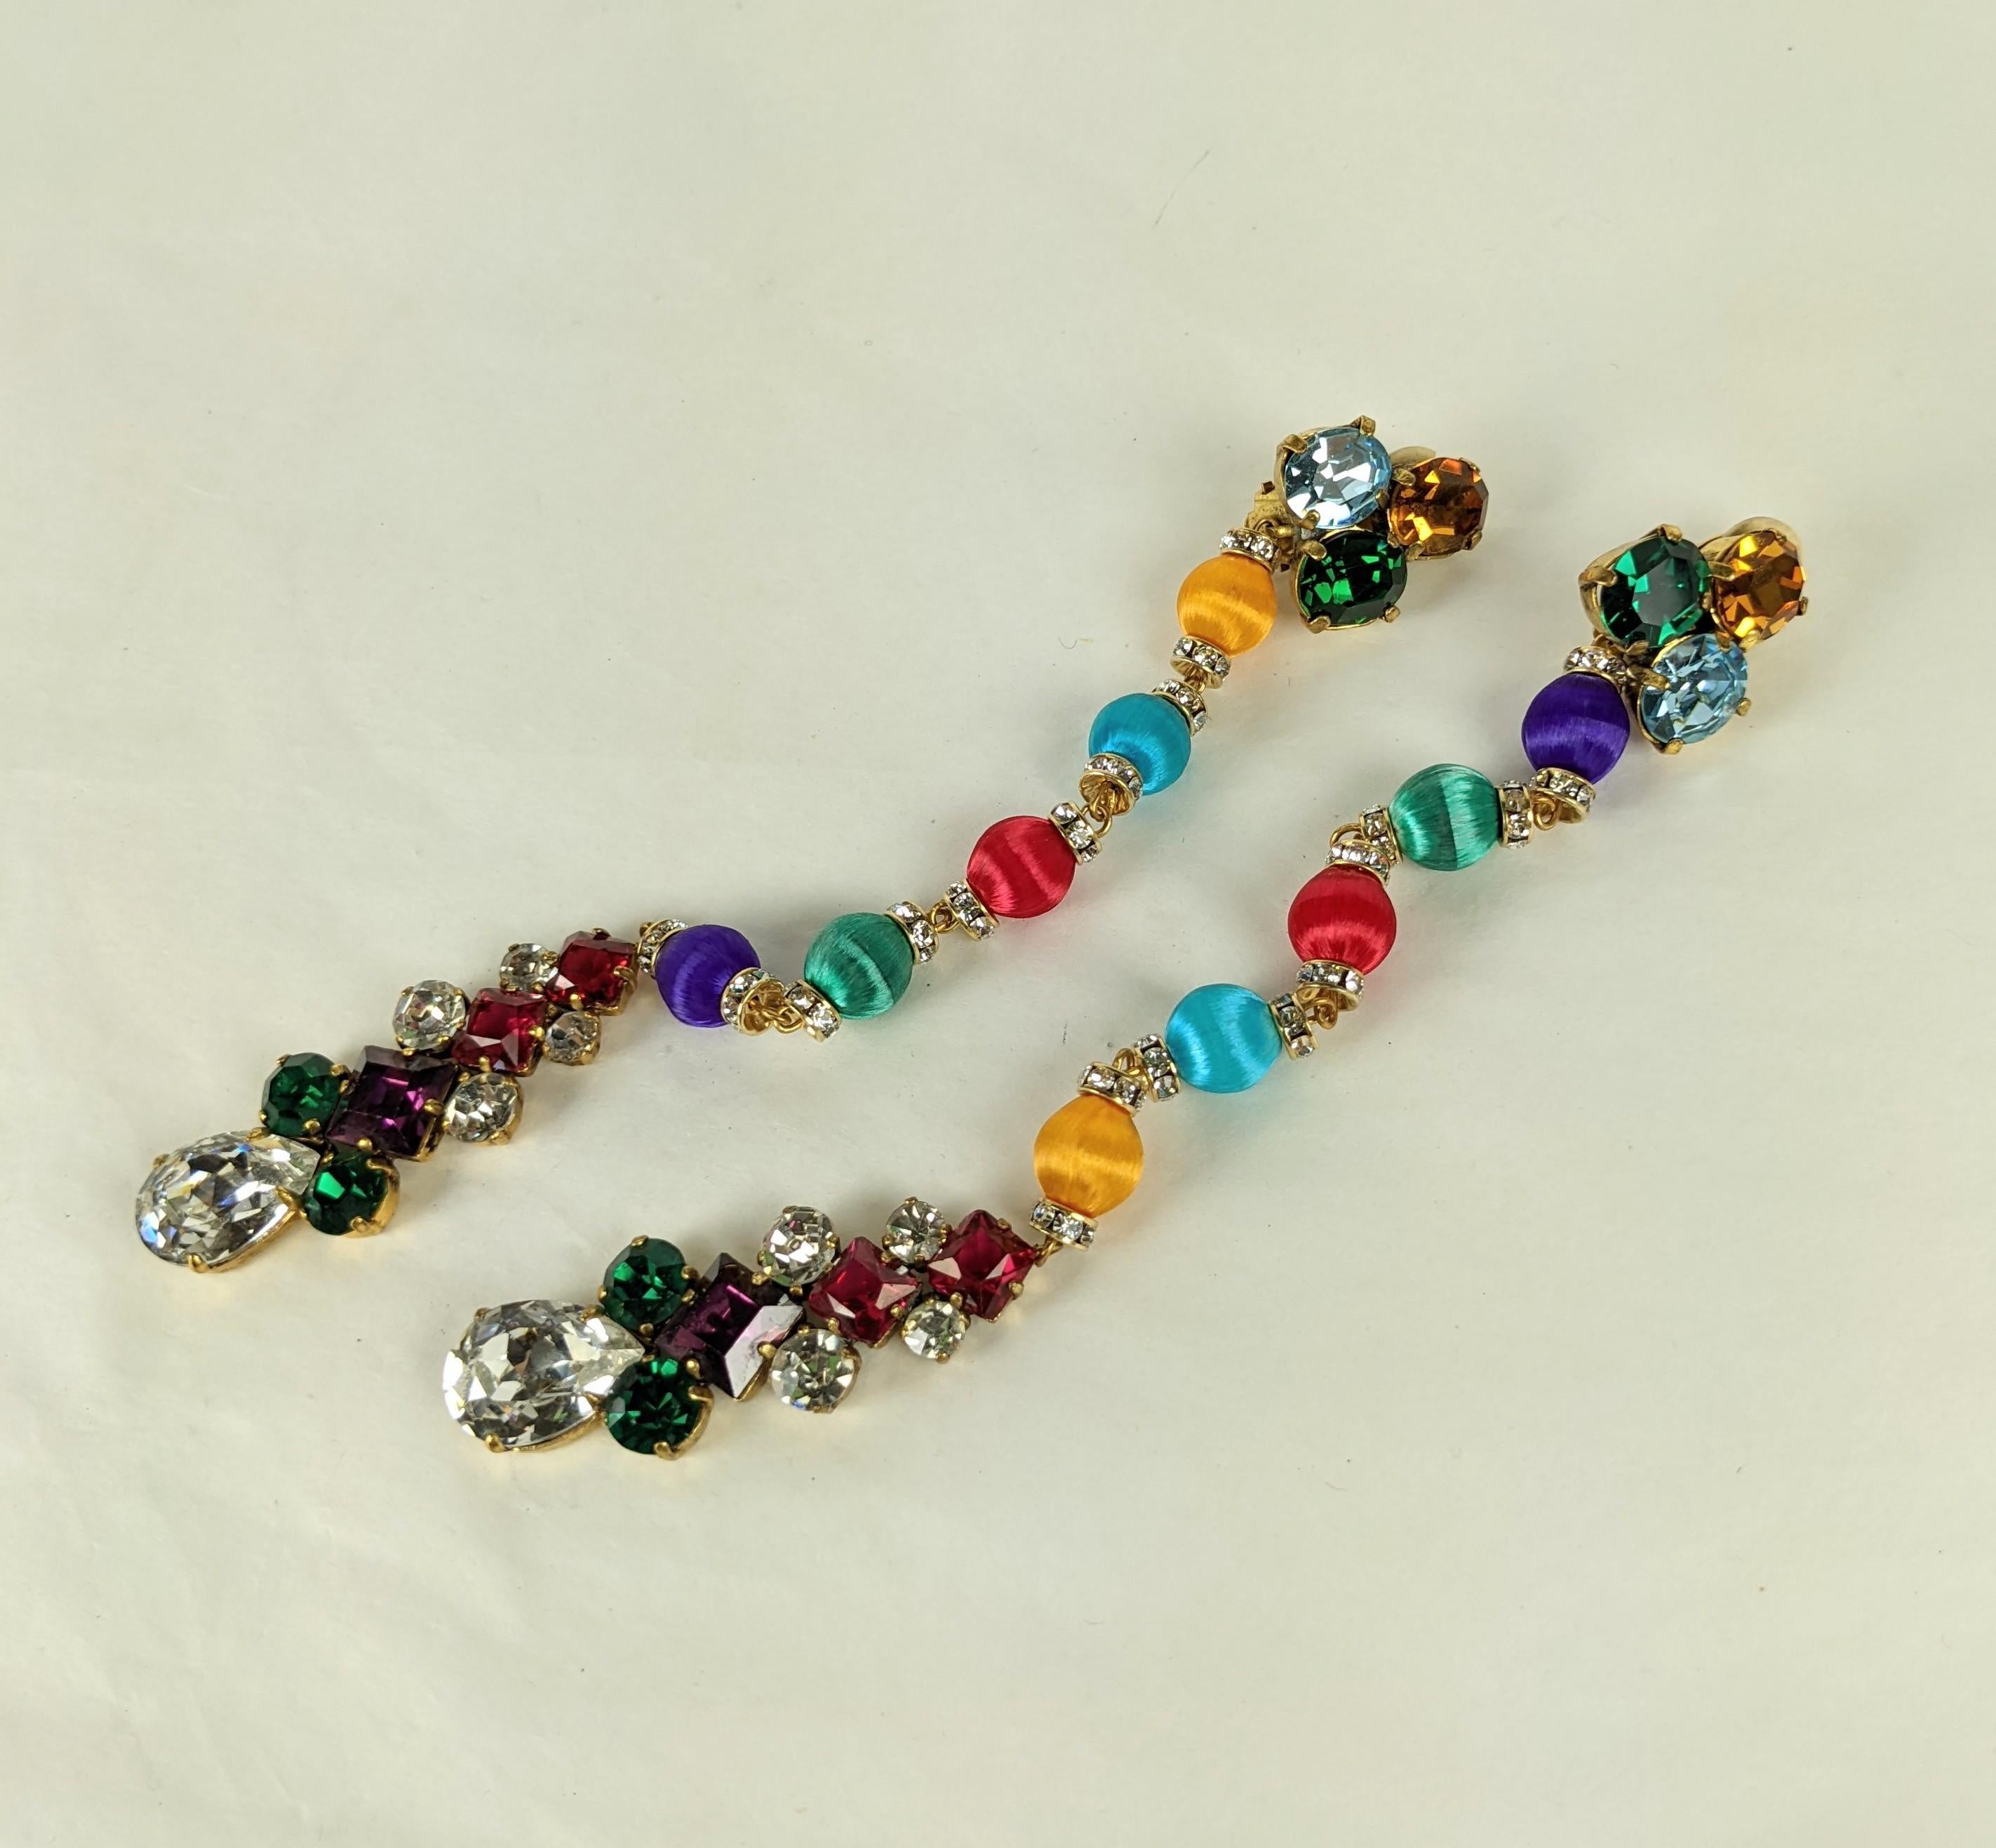 Yves Saint Laurent  Haute Couture rare long earrings. Composed of multi colored hand made   Passementerie silk beads, crystal rondelles and prong set Swarowski assorted gem colored faceted crystal rhinestones.
Excellent Condition, Unsigned, L 7.25